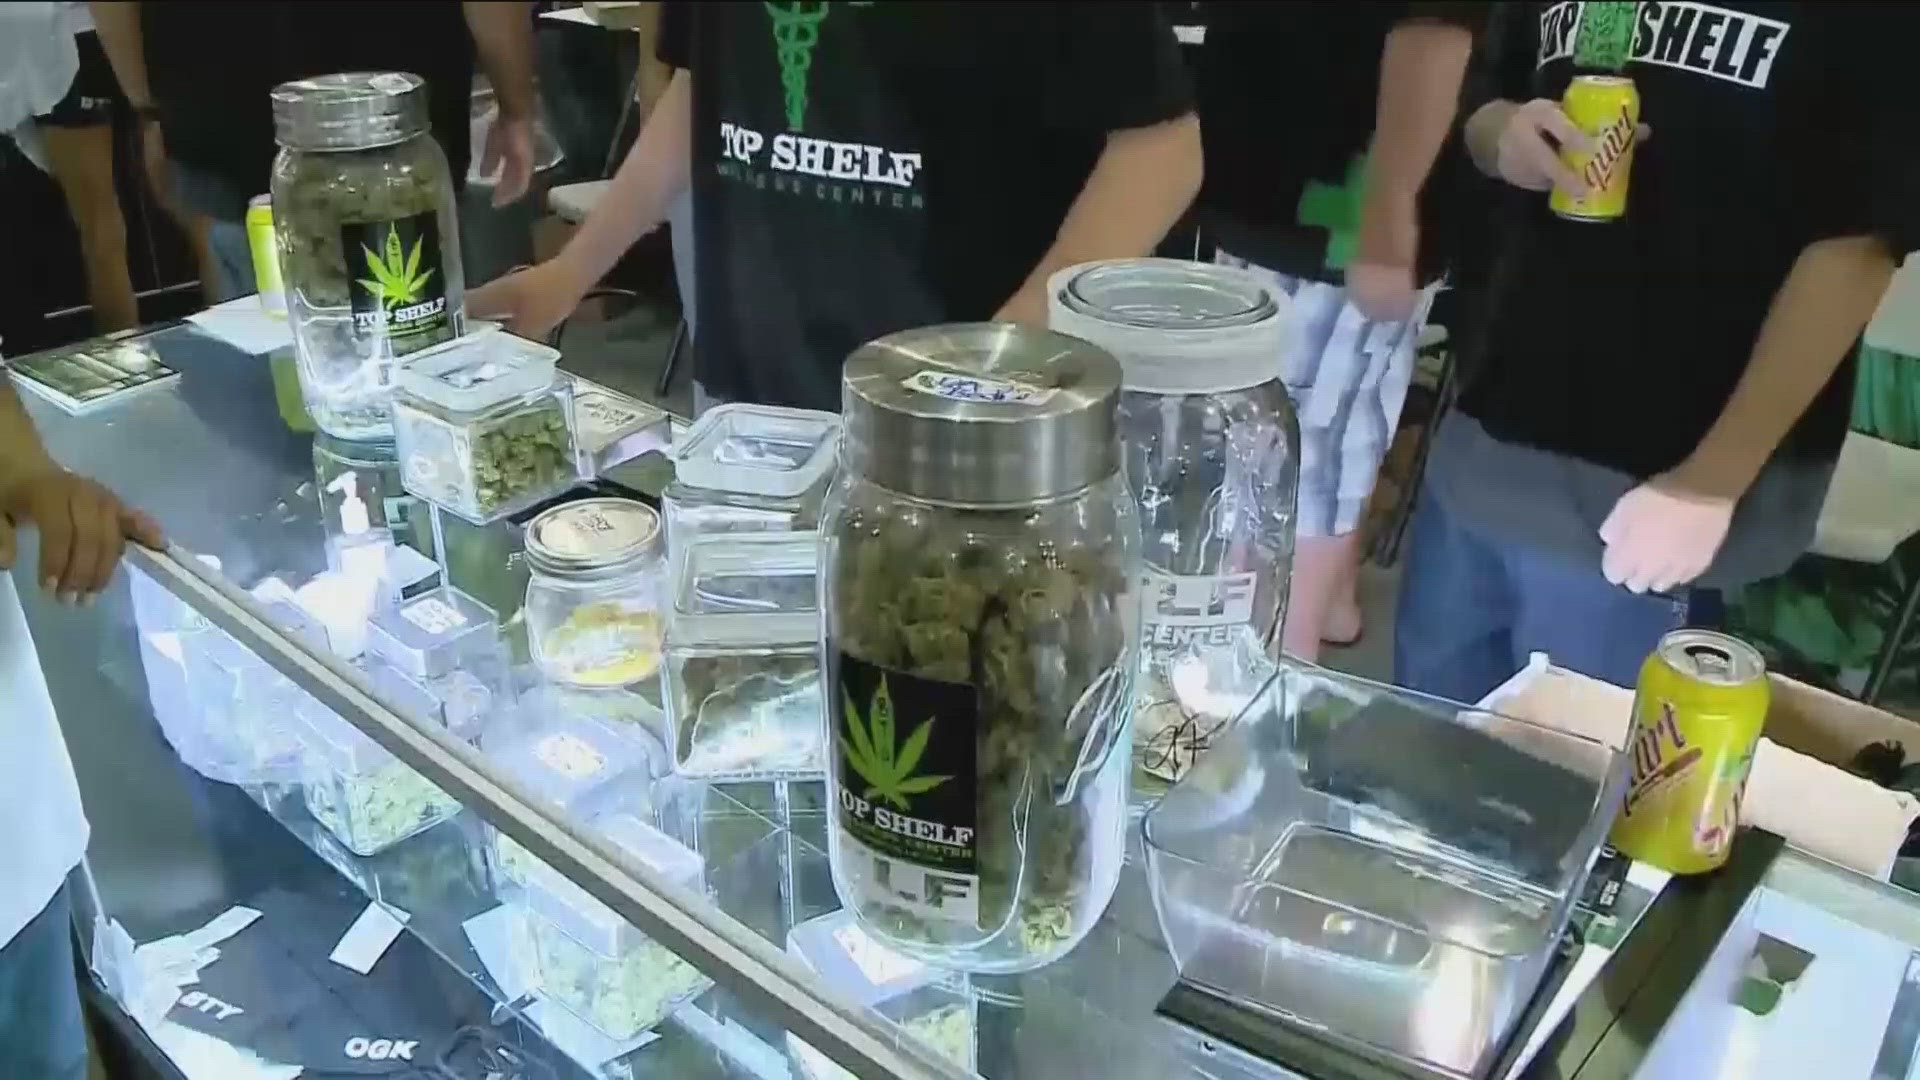 New rules will soon be in effect for those applying for recreational marijuana licenses as the application process starting in less than seven days.